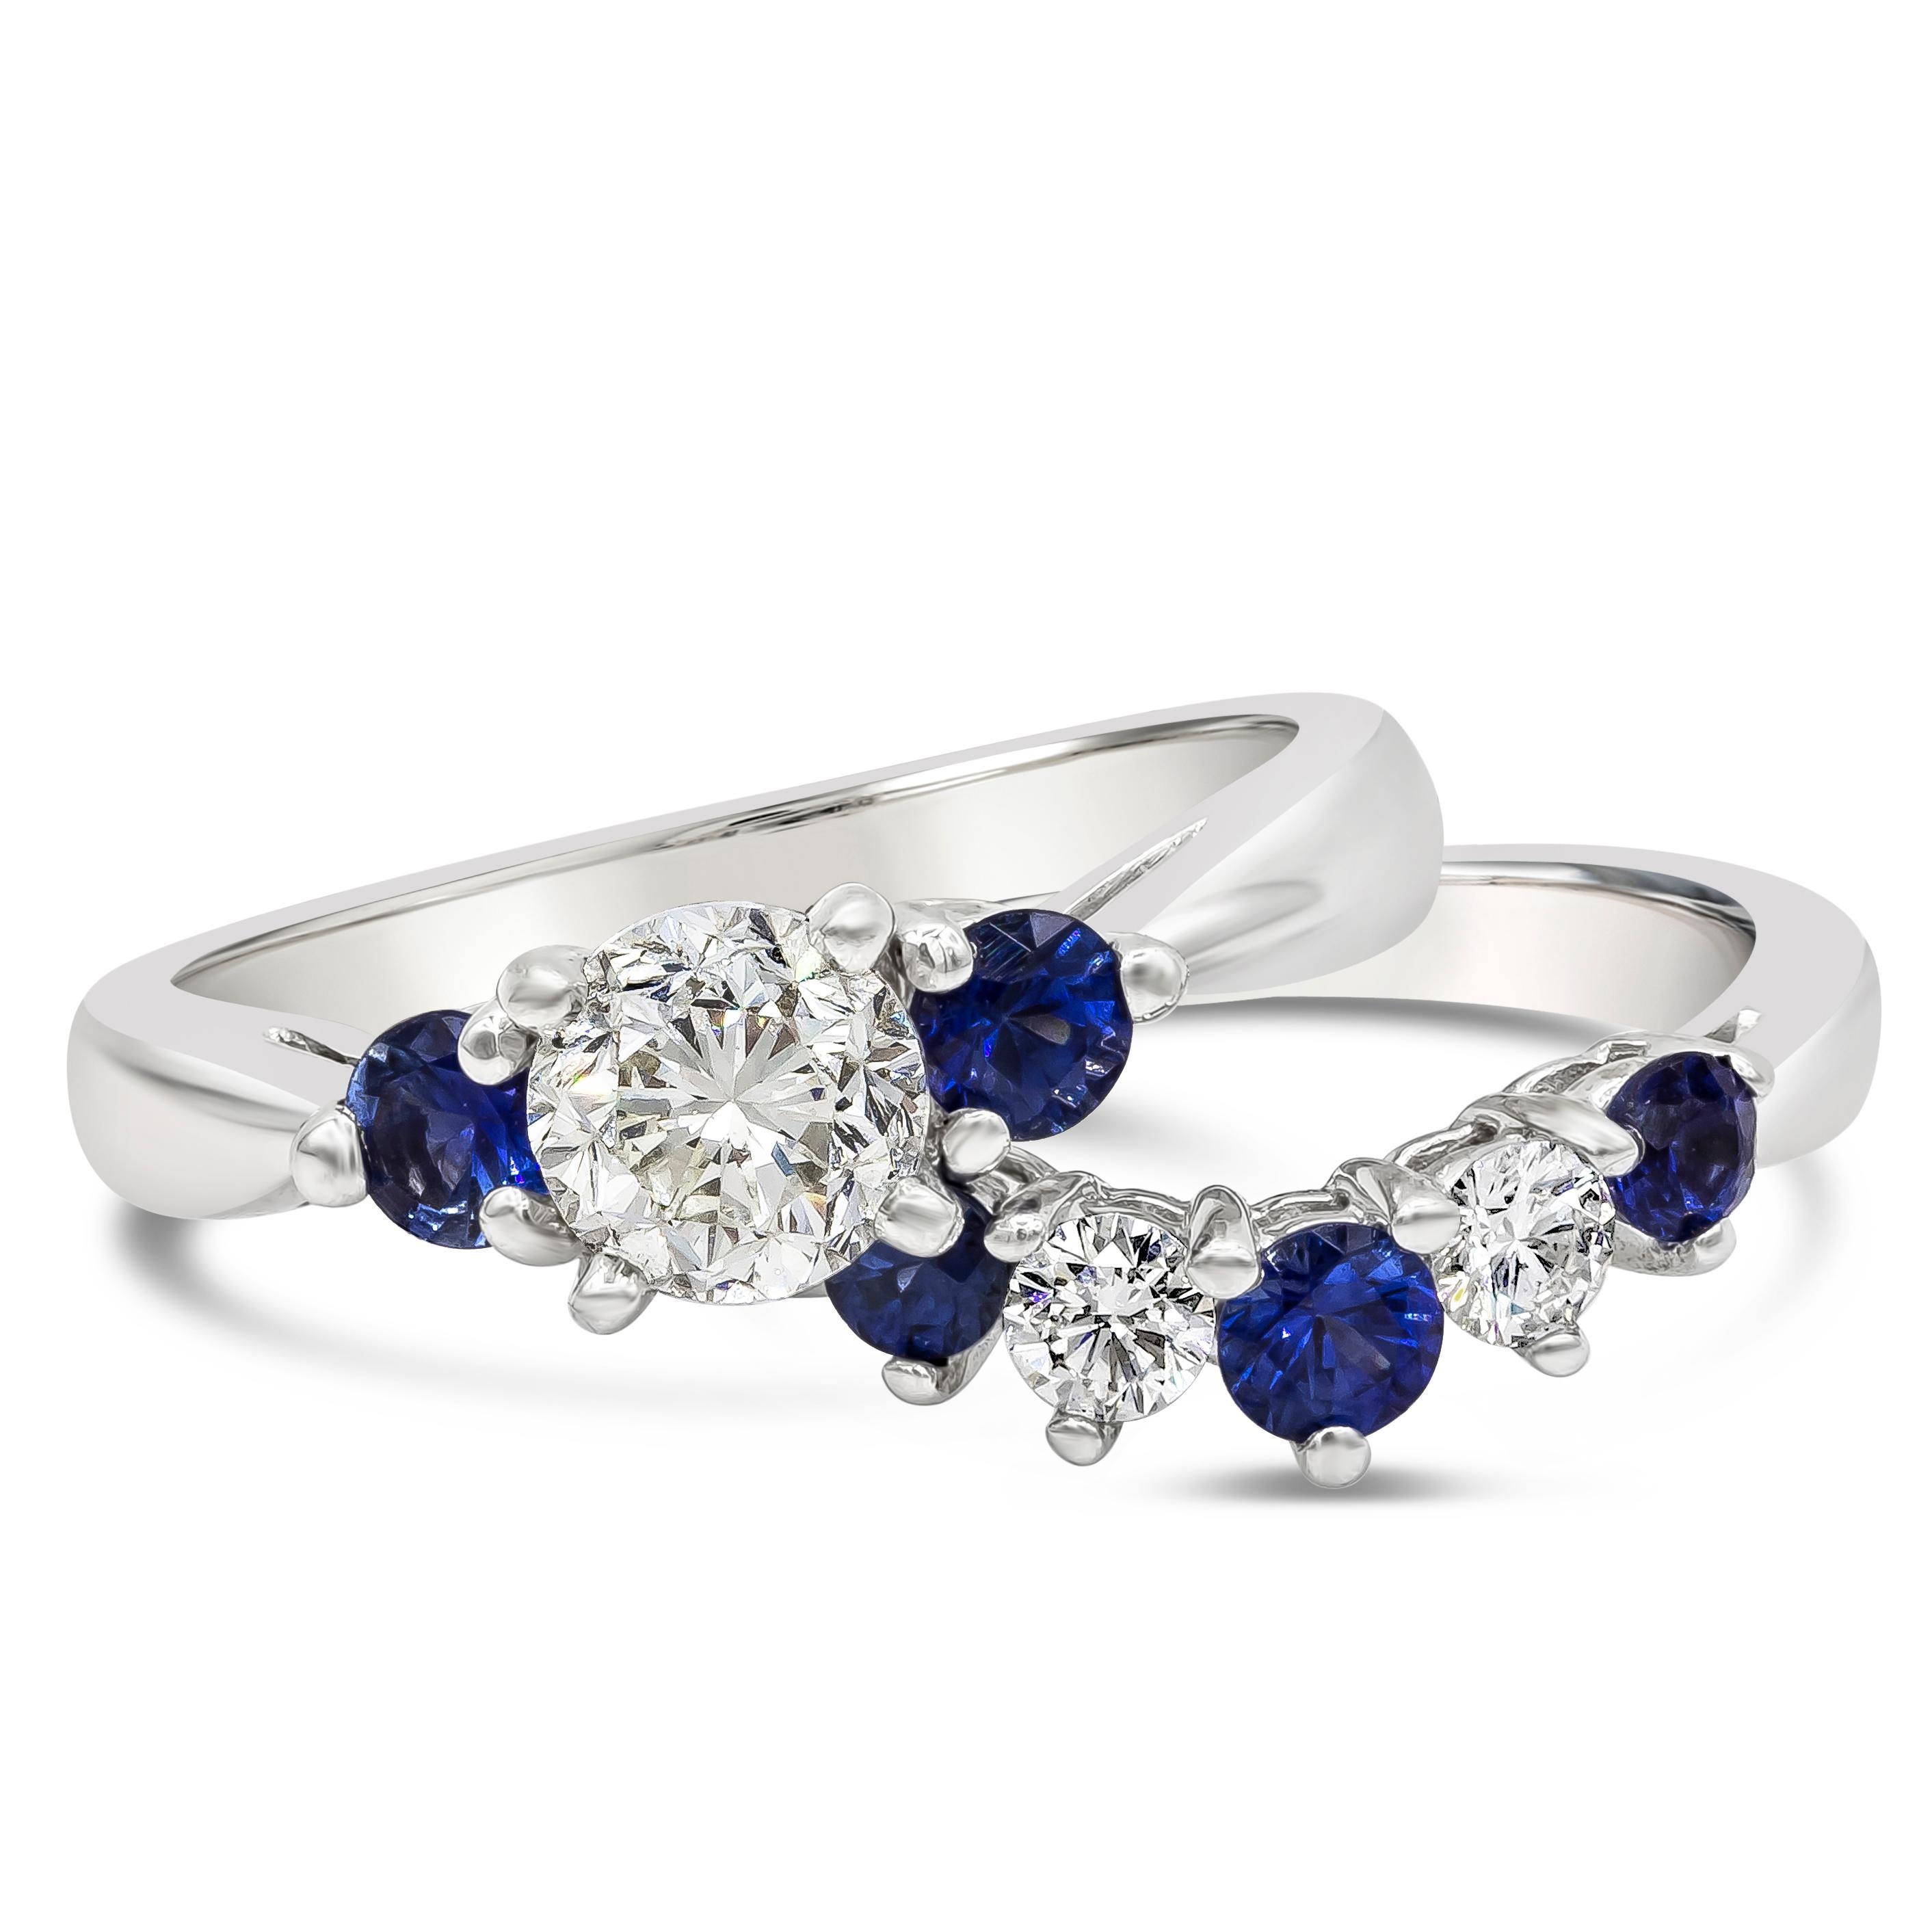 A beautiful and color-rich set of engagement ring and wedding band. The engagement ring features a 1.01 carats round brilliant center diamond certified by EGL as I color and VS2 clarity, flanked by two blue sapphires. The wedding band showcases blue